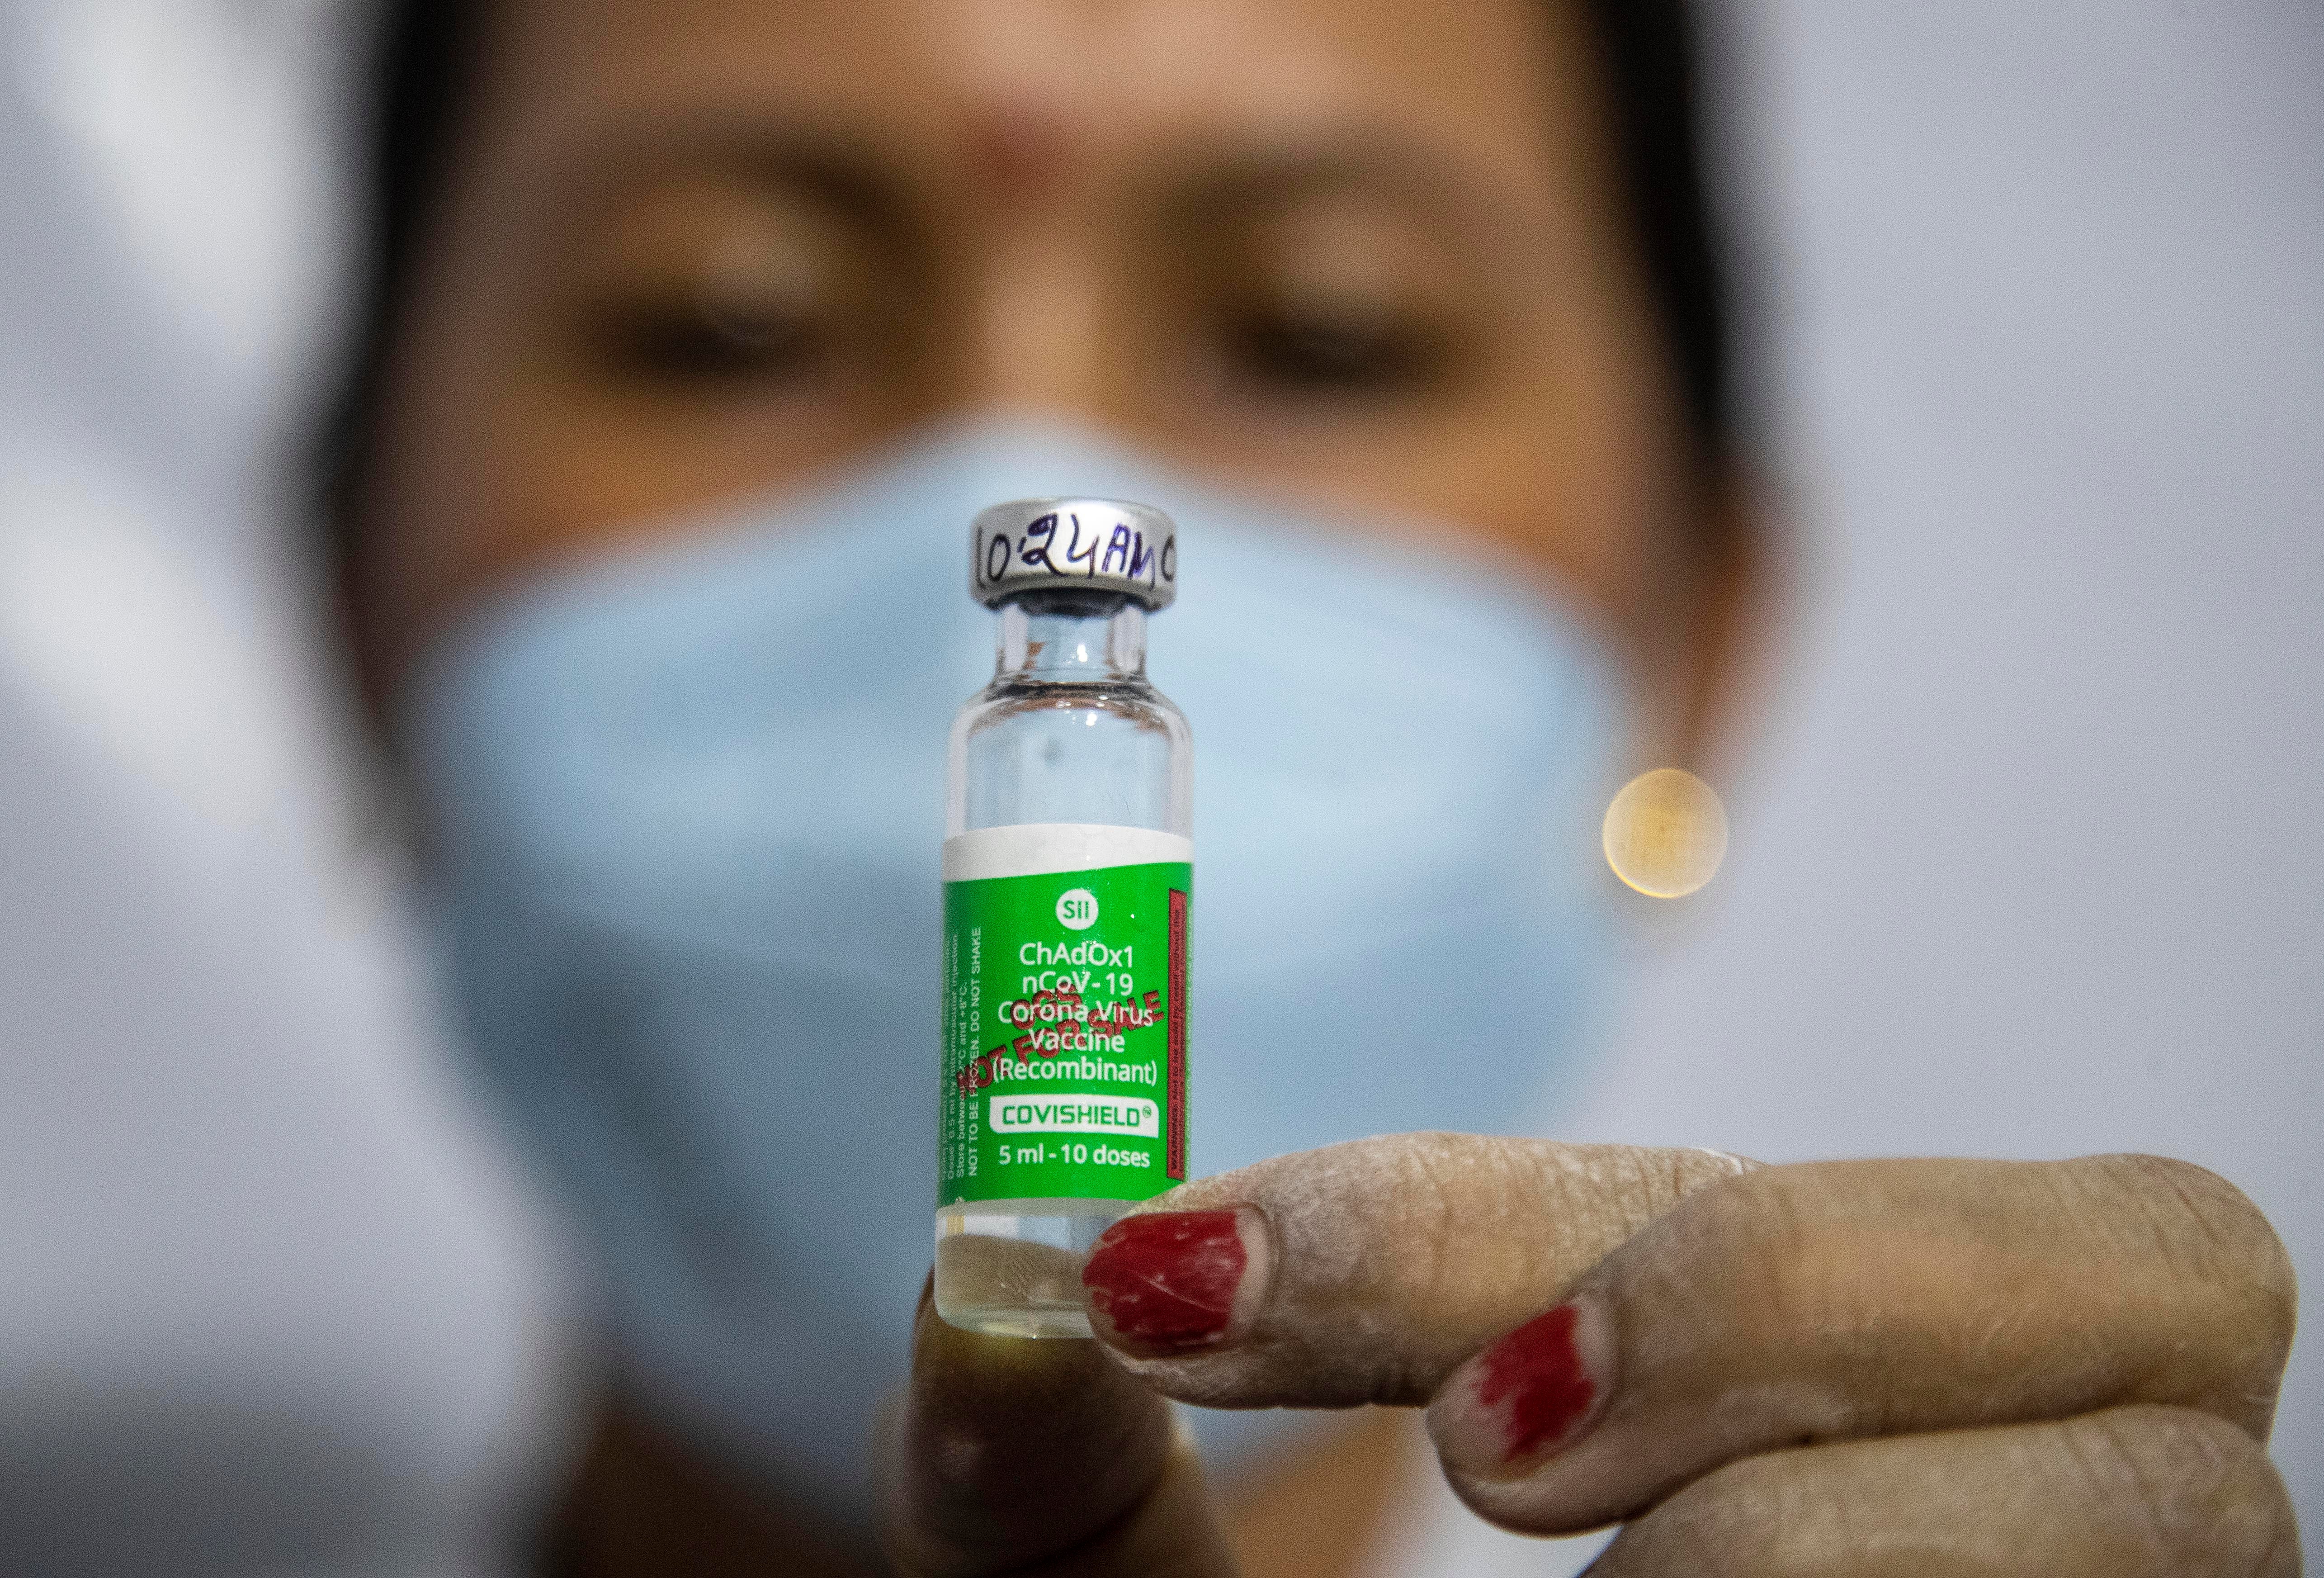 India started its third vaccination rollout across the country today aiming to inoculate everyone above 45 years old